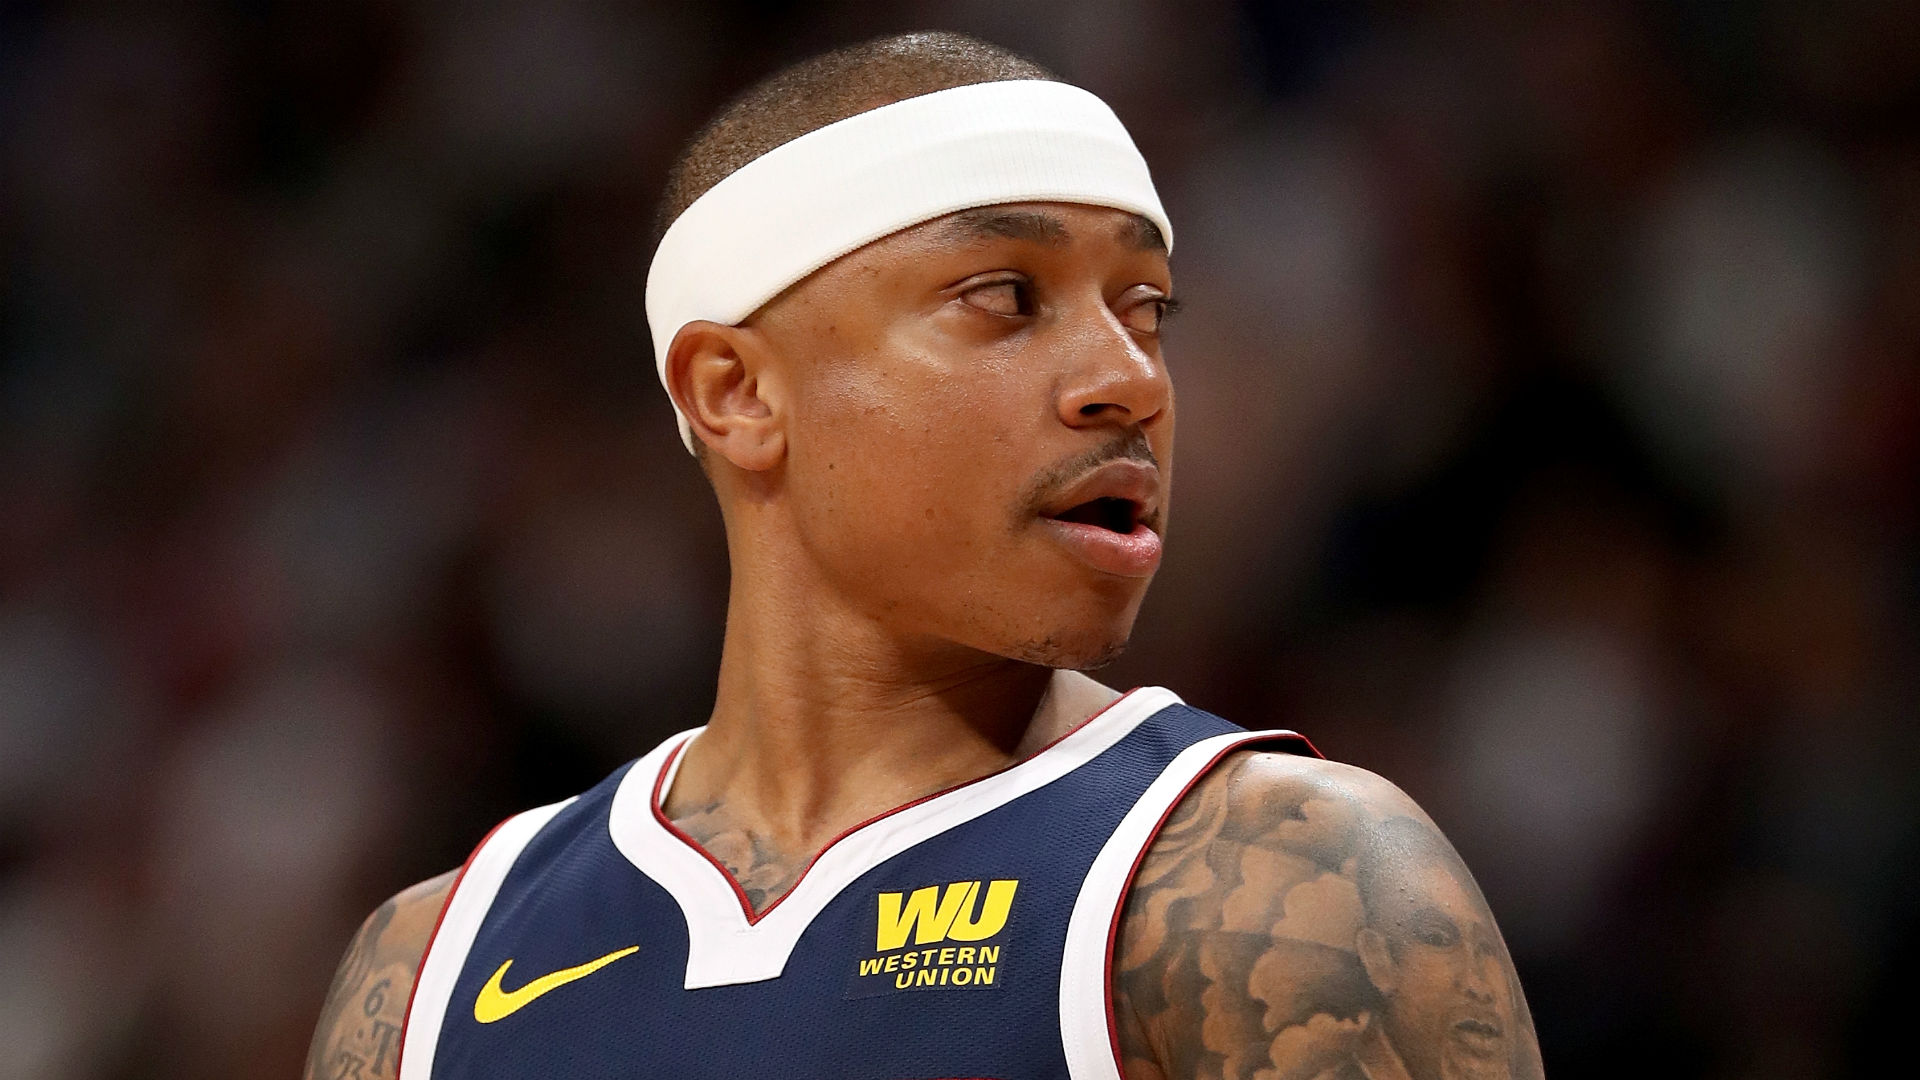 After two seasons riddled by injuries, Isaiah Thomas said he was ready to get back to his best.